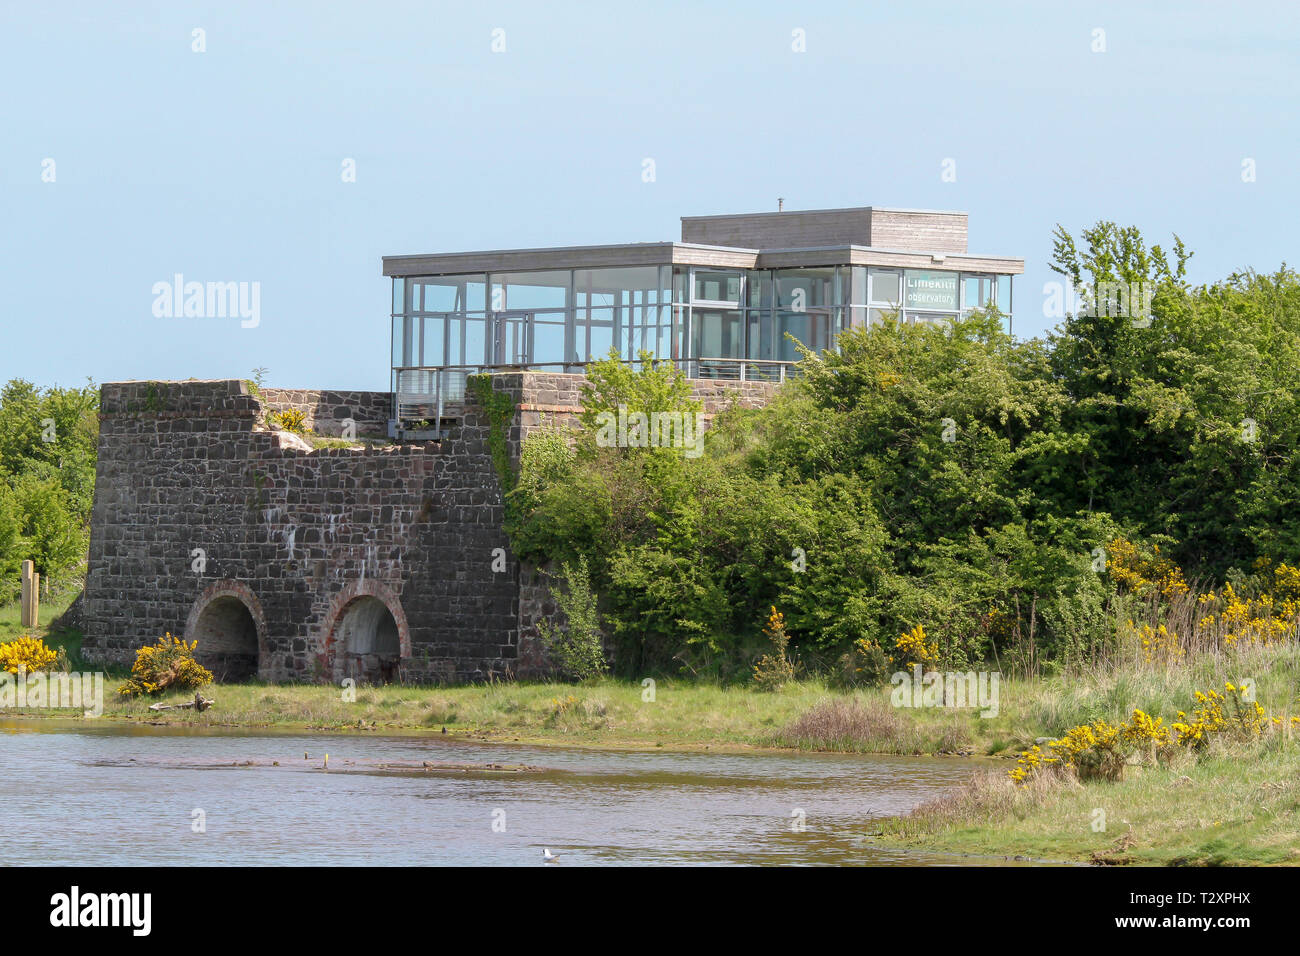 WWT Castle Espie reserve, Comber, County Down, Northern Ireland. Stock Photo